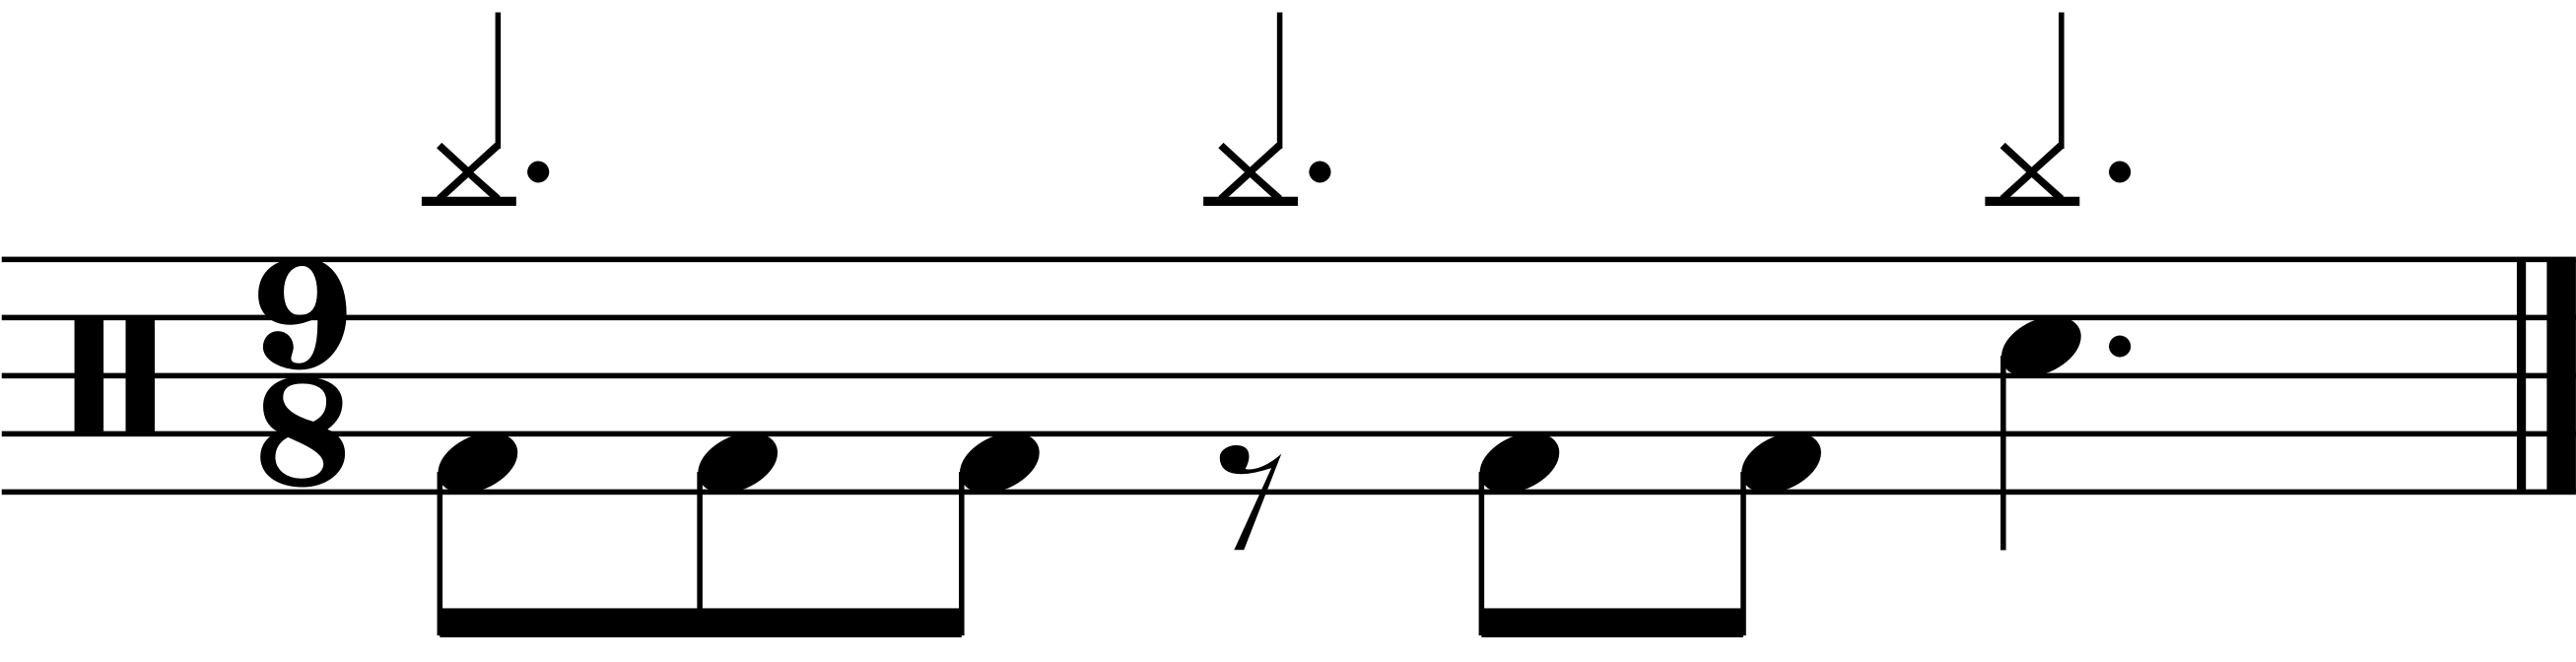 A 9/8 groove with a specific snare placement